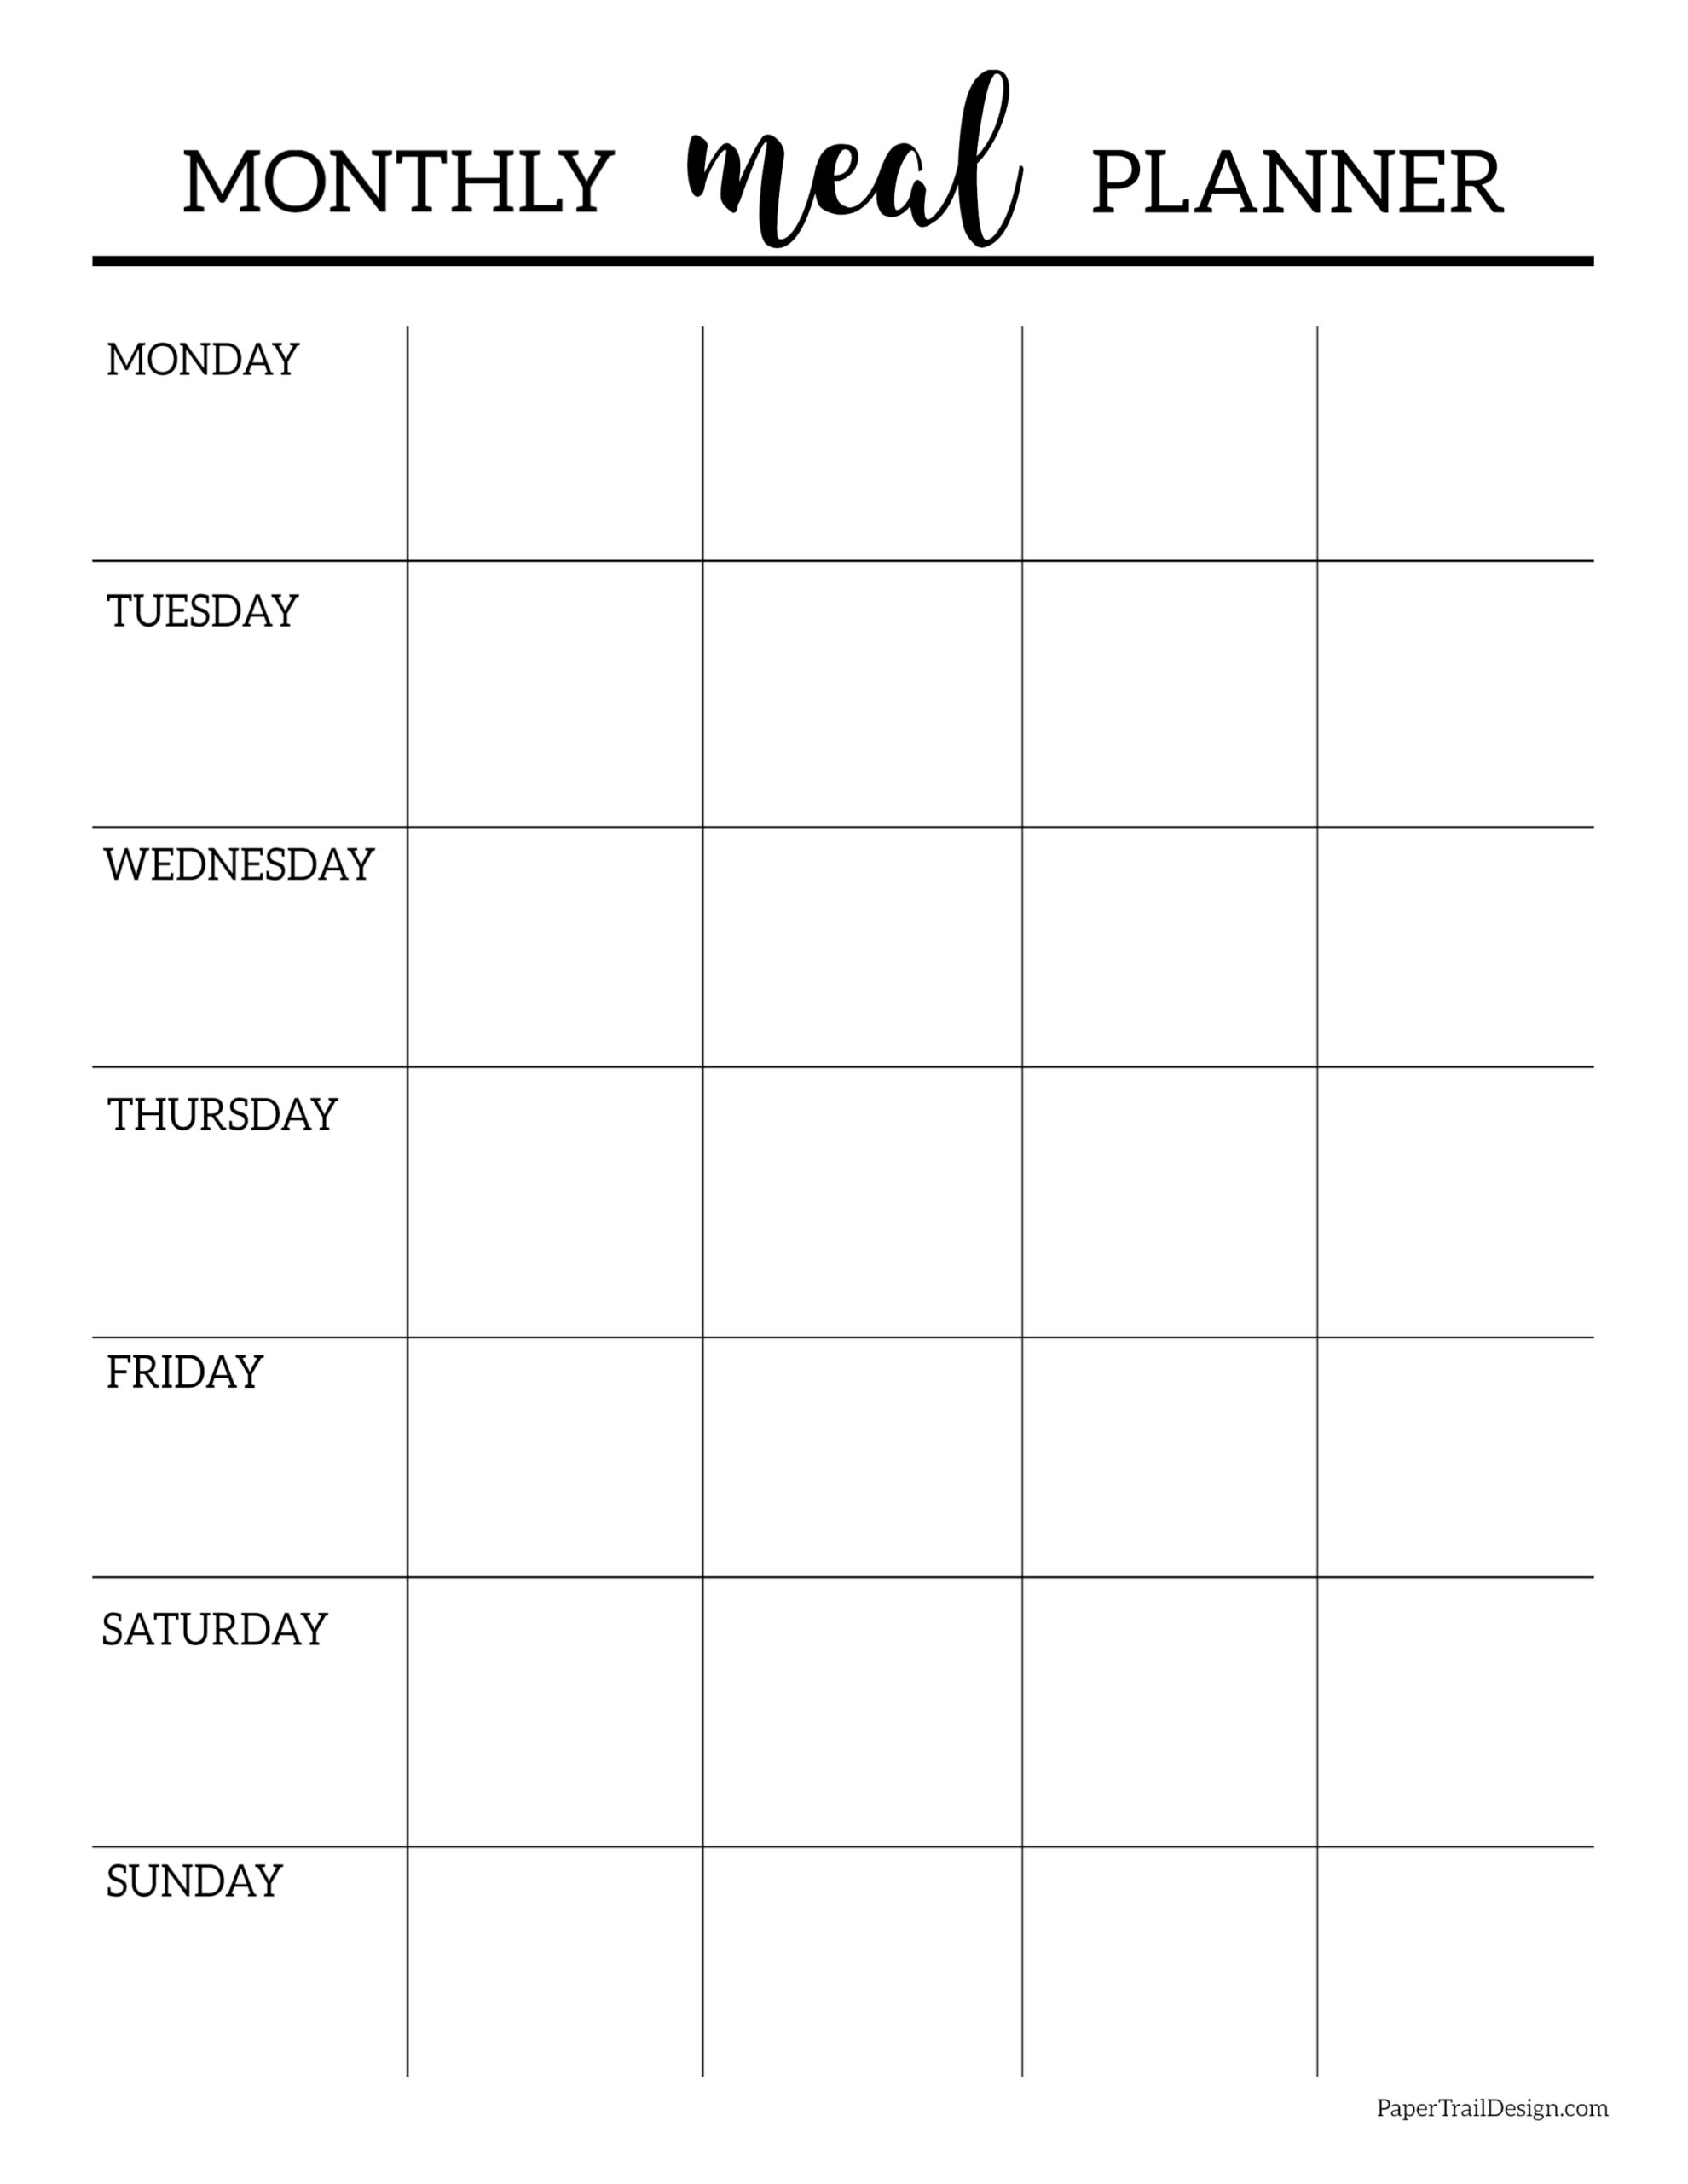 monthly meal planner printable free